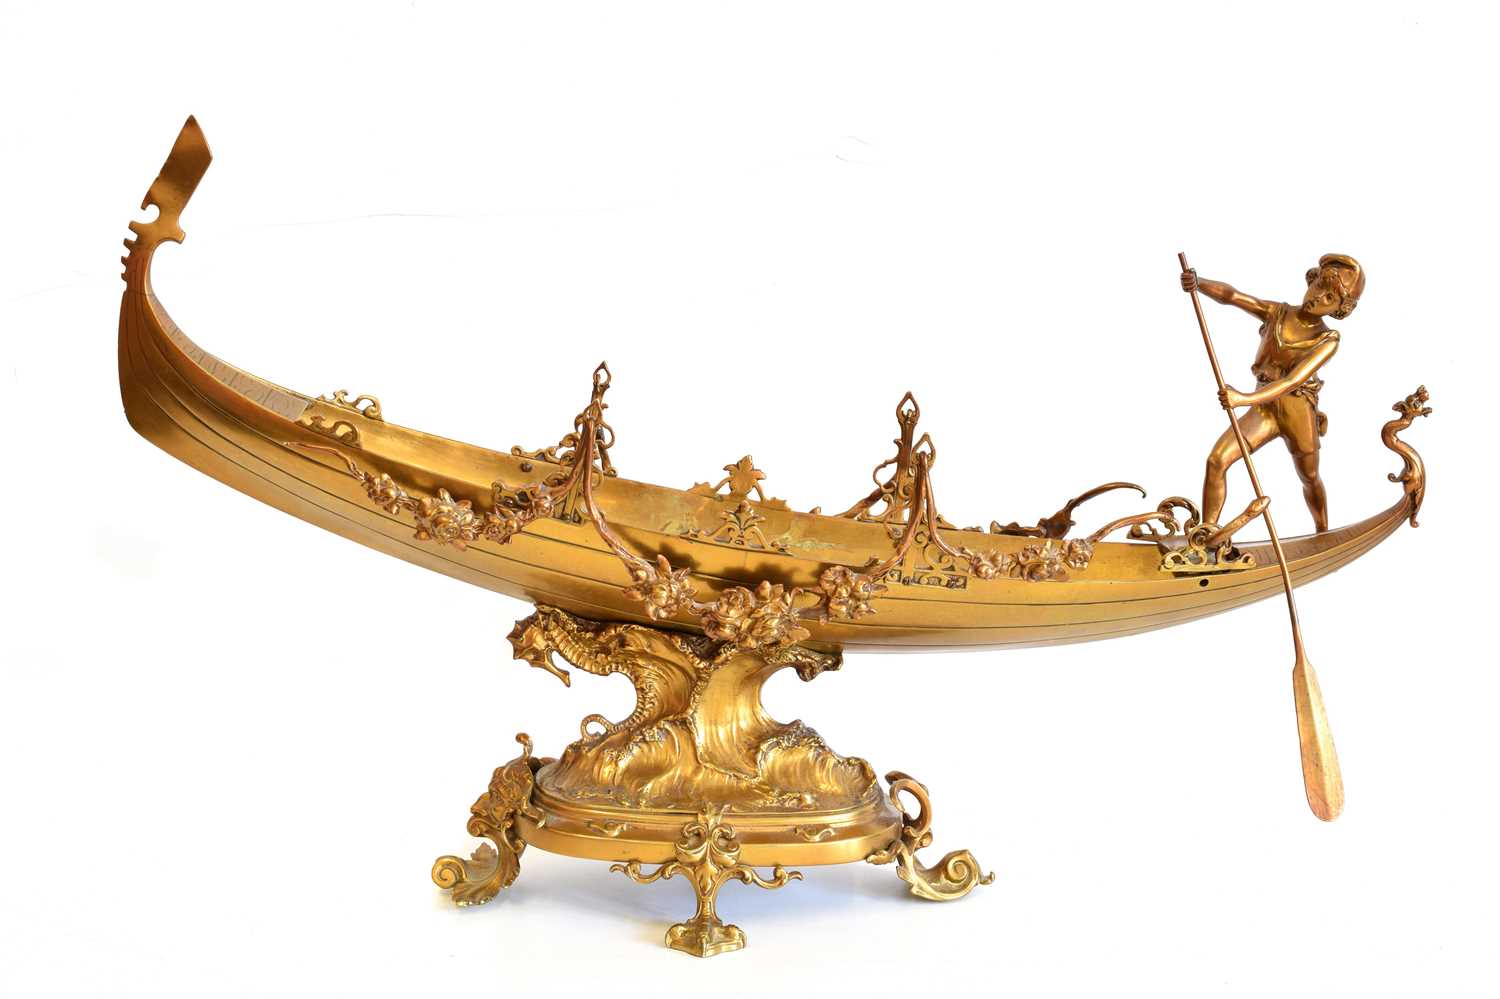 Lot 50 - Late 19th century cast brass table centrepiece in the form of a Gondola